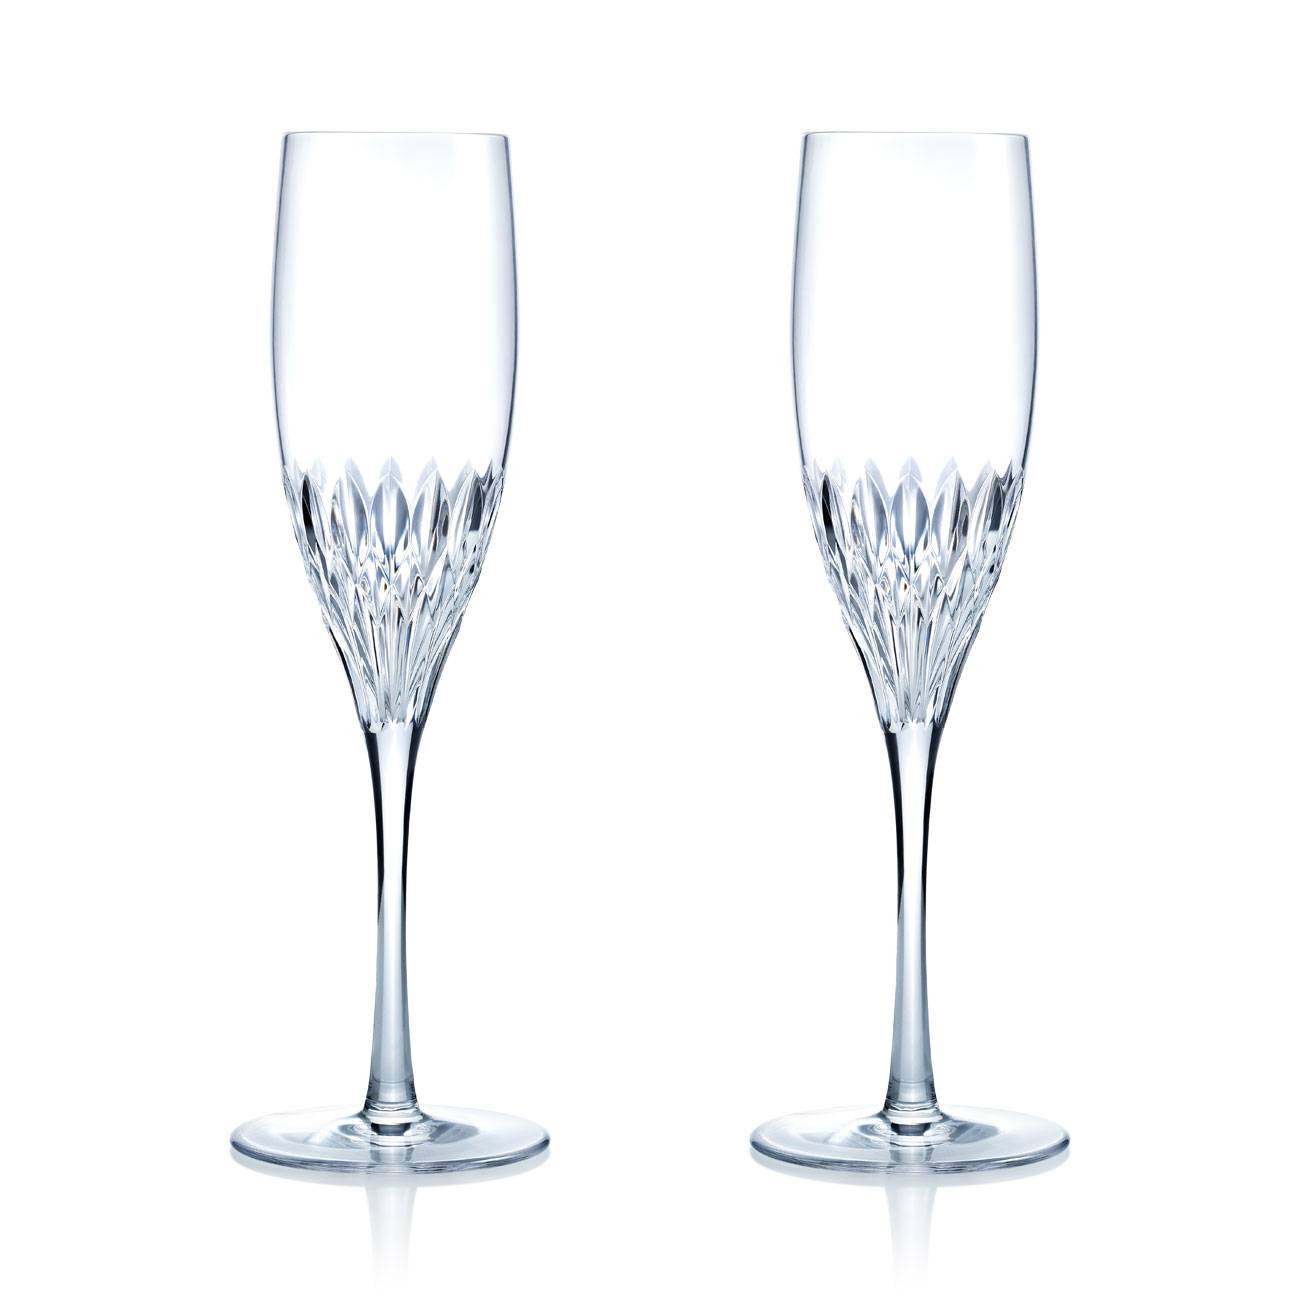 waterford vase patterns of waterford crystal marquis wine glasses migrant resource network intended for short stem white wine gles interior design ideas